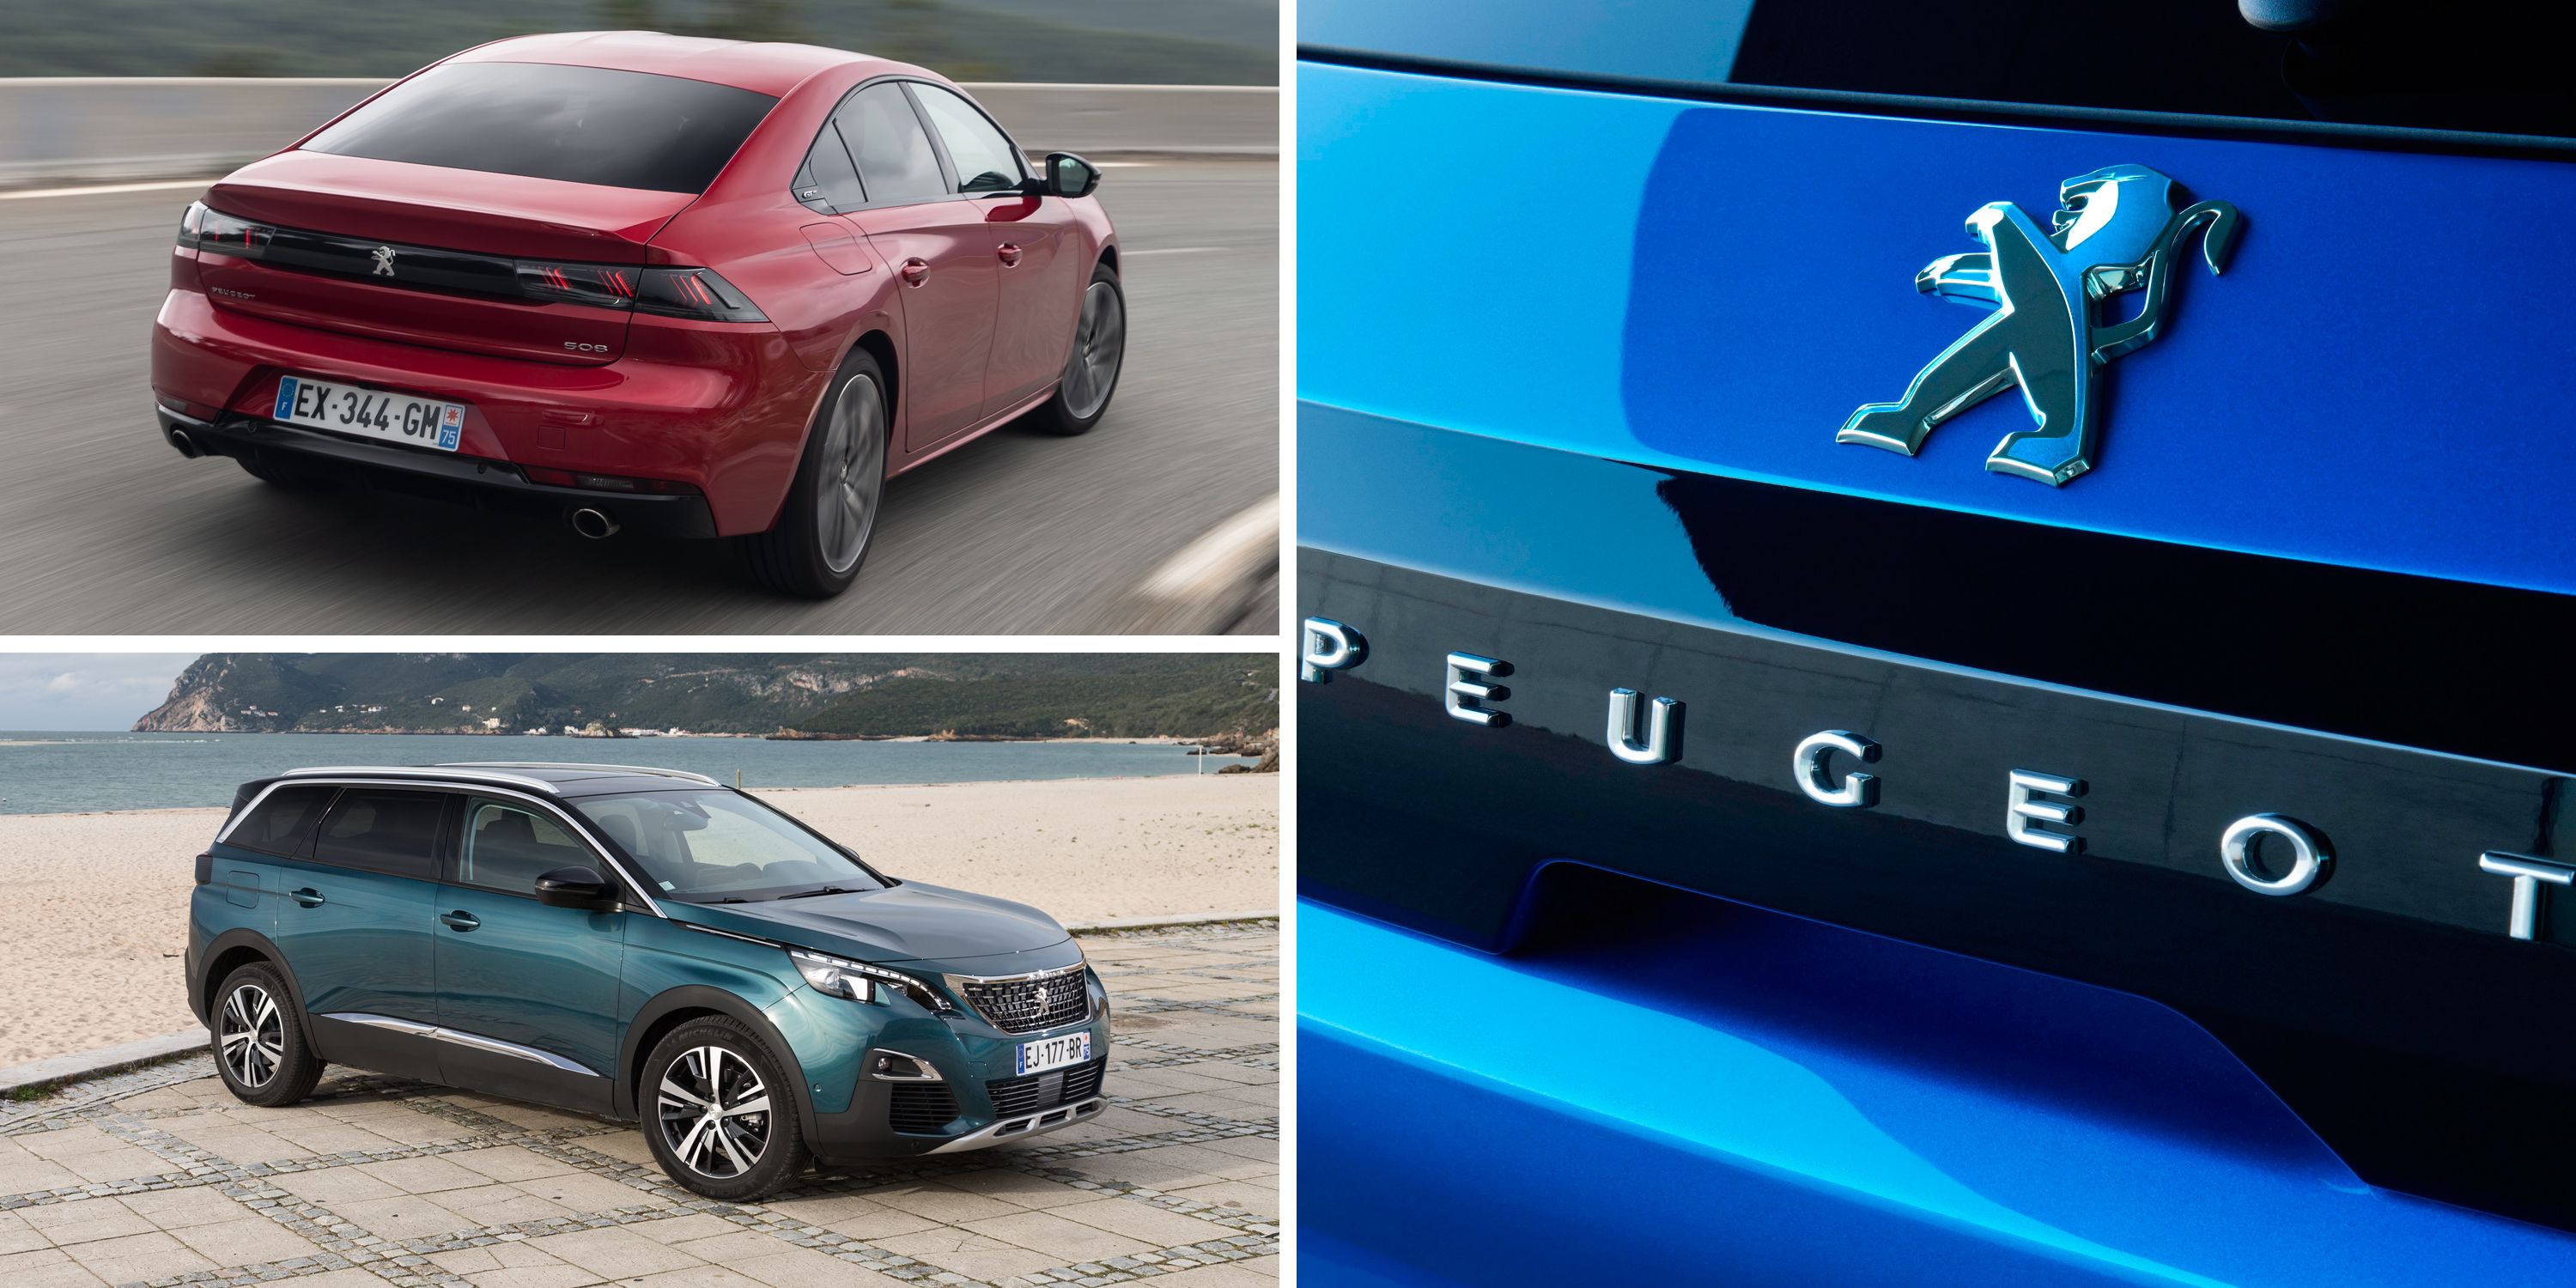 Peugeot Lineup of French Cars and SUVs – Returning to the U.S.